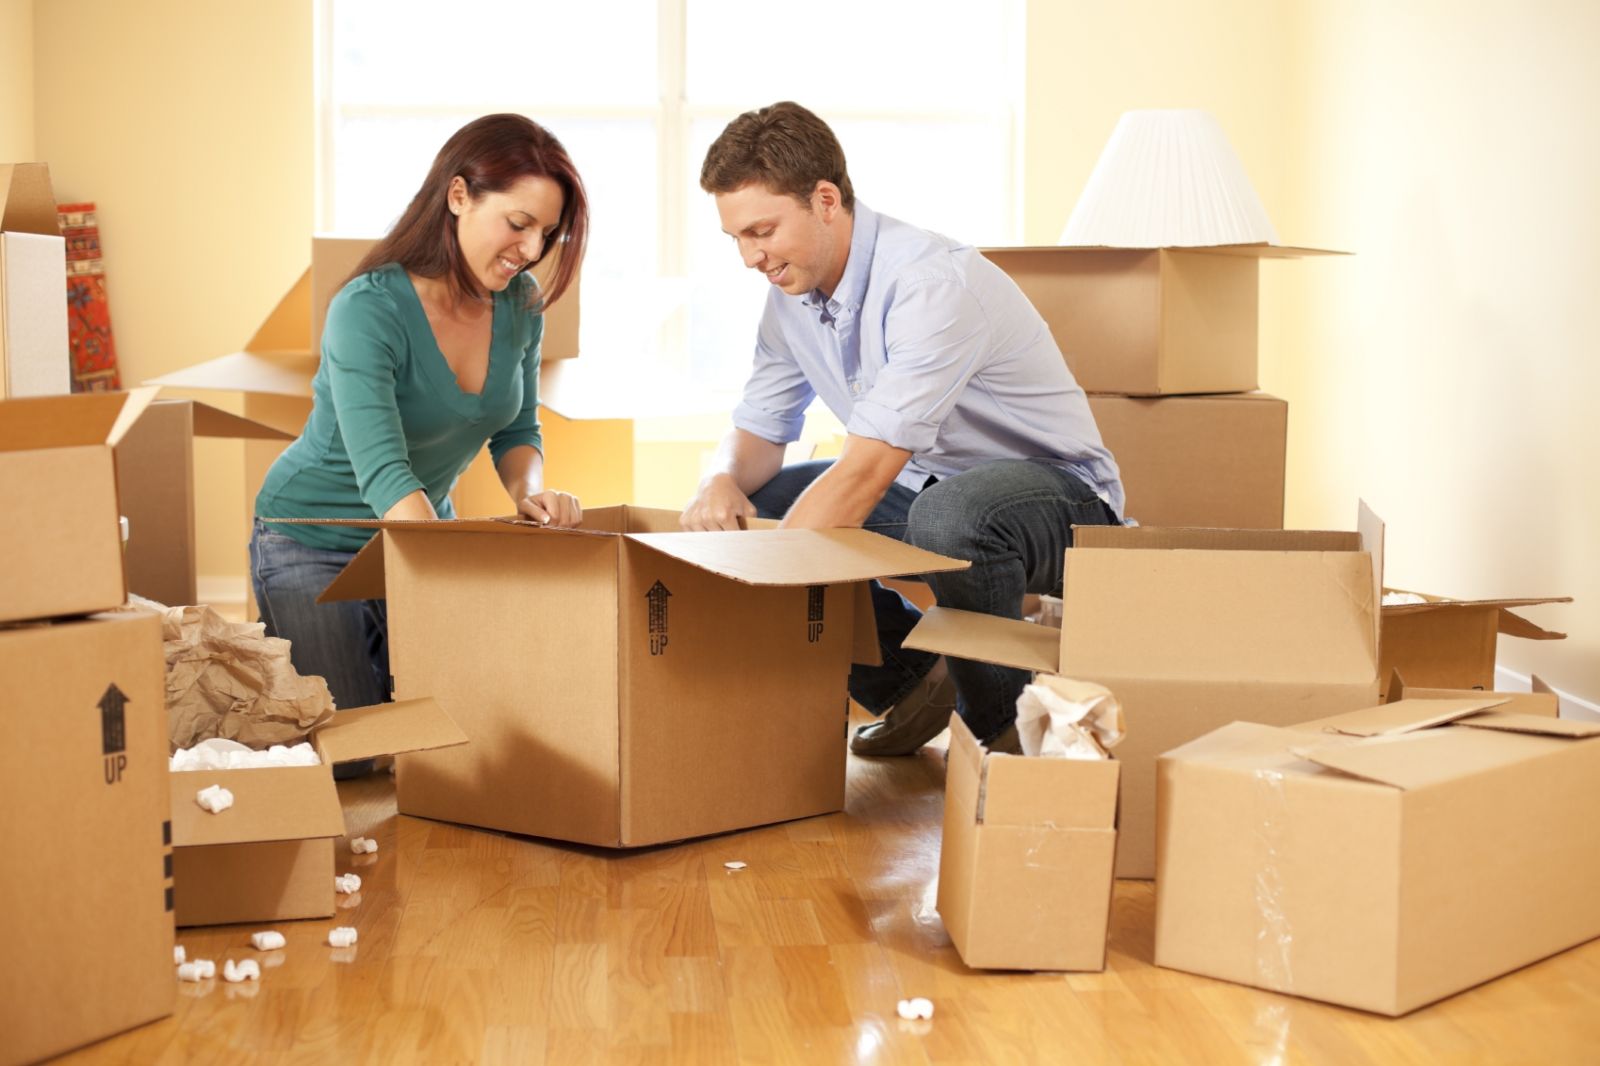 7 Tips To Keep In Mind While Moving To A New Place